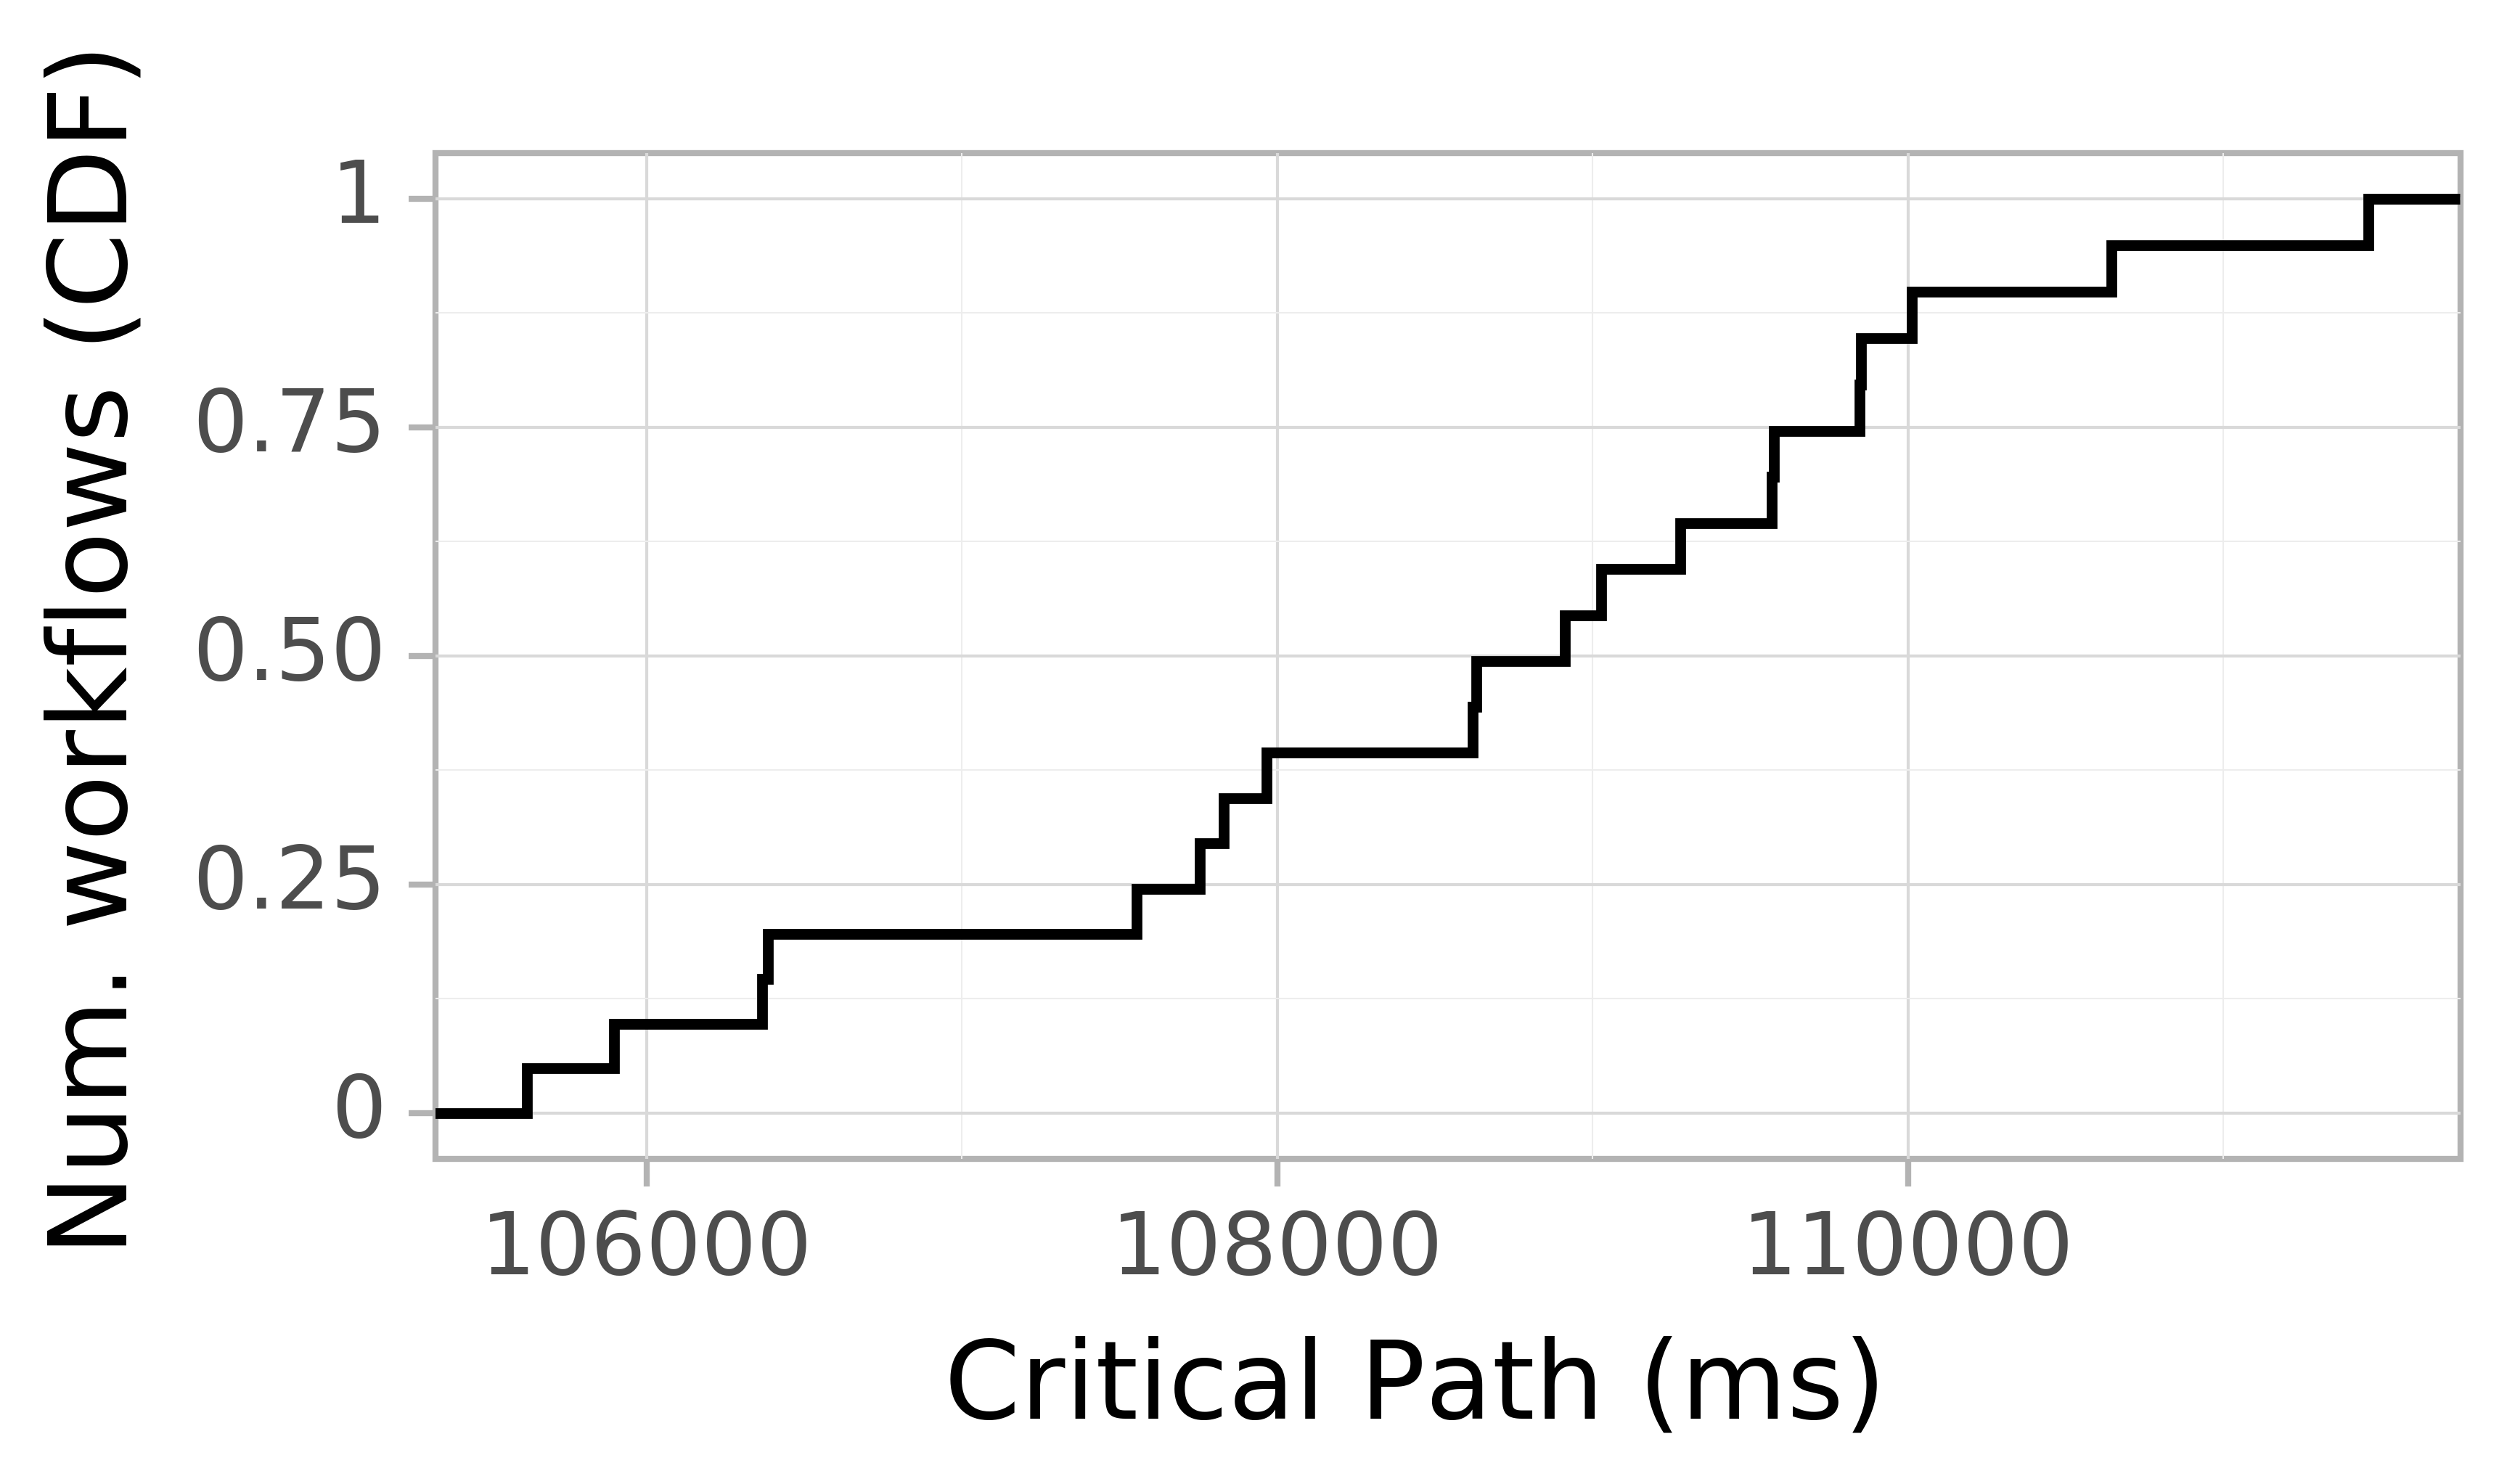 Job runtime CDF graph for the askalon-new_ee9 trace.